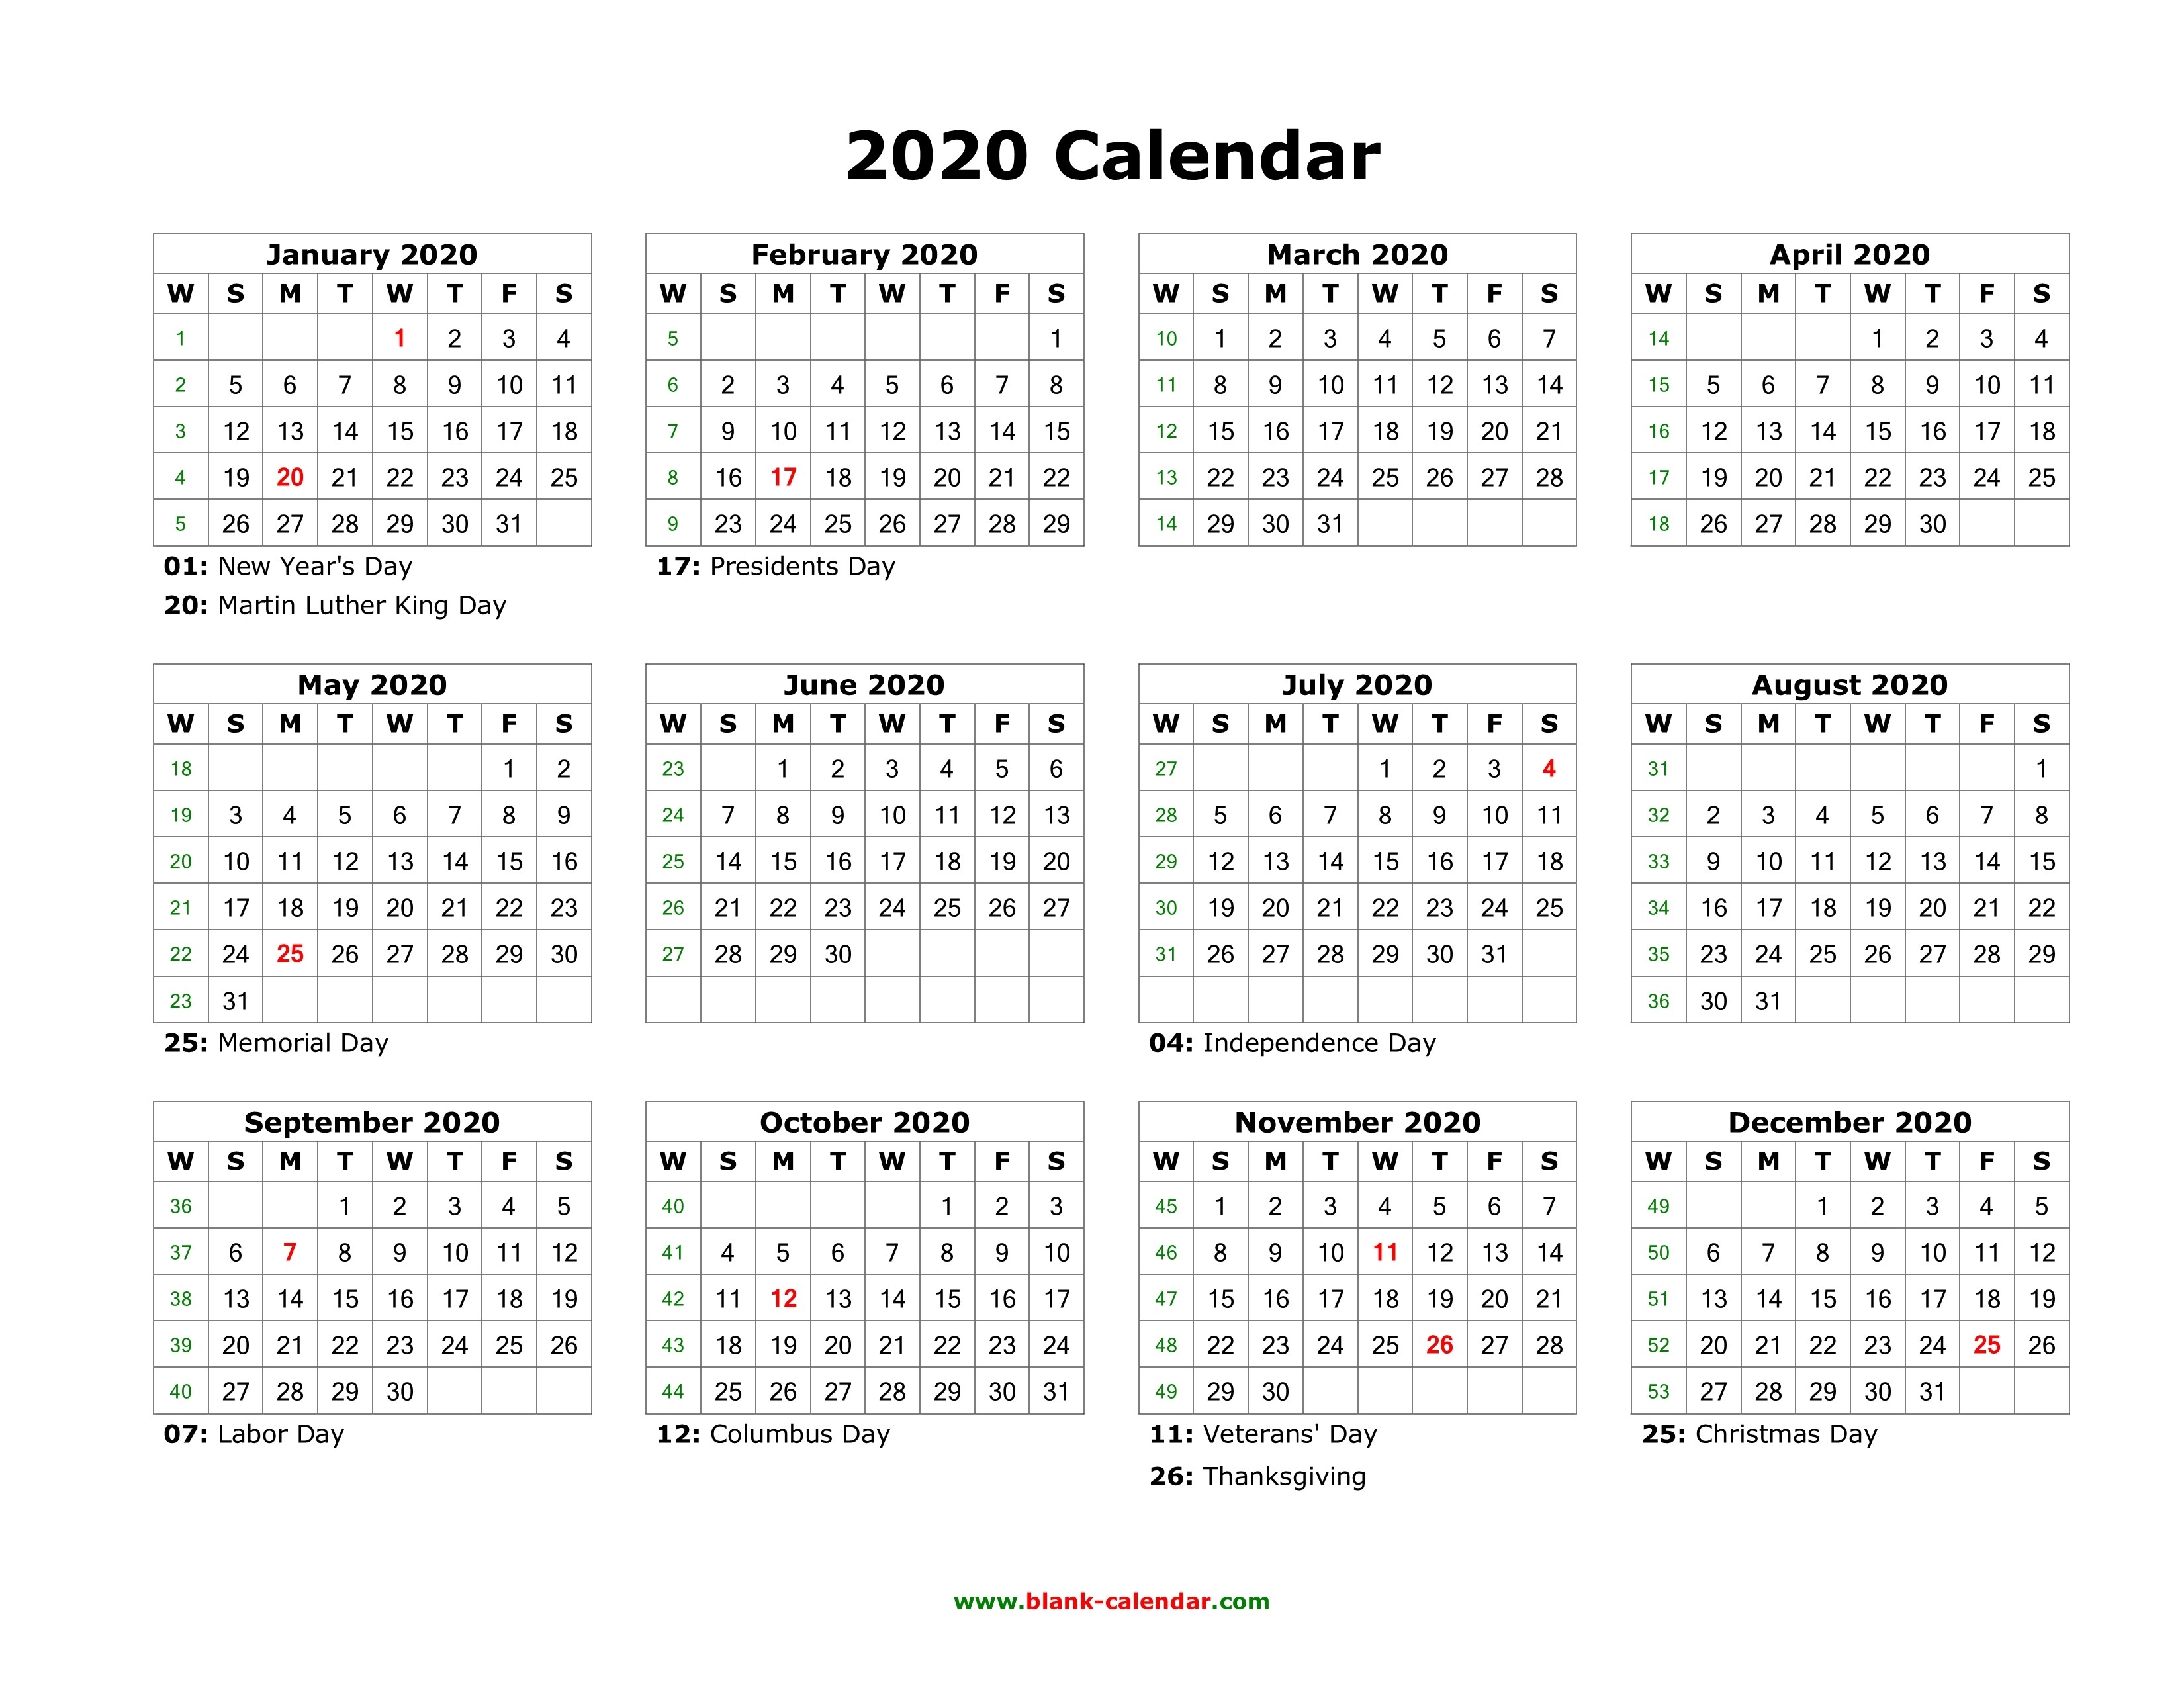 Download Blank Calendar 2020 With Us Holidays (12 Months On-2020 Calendar Us Holidays